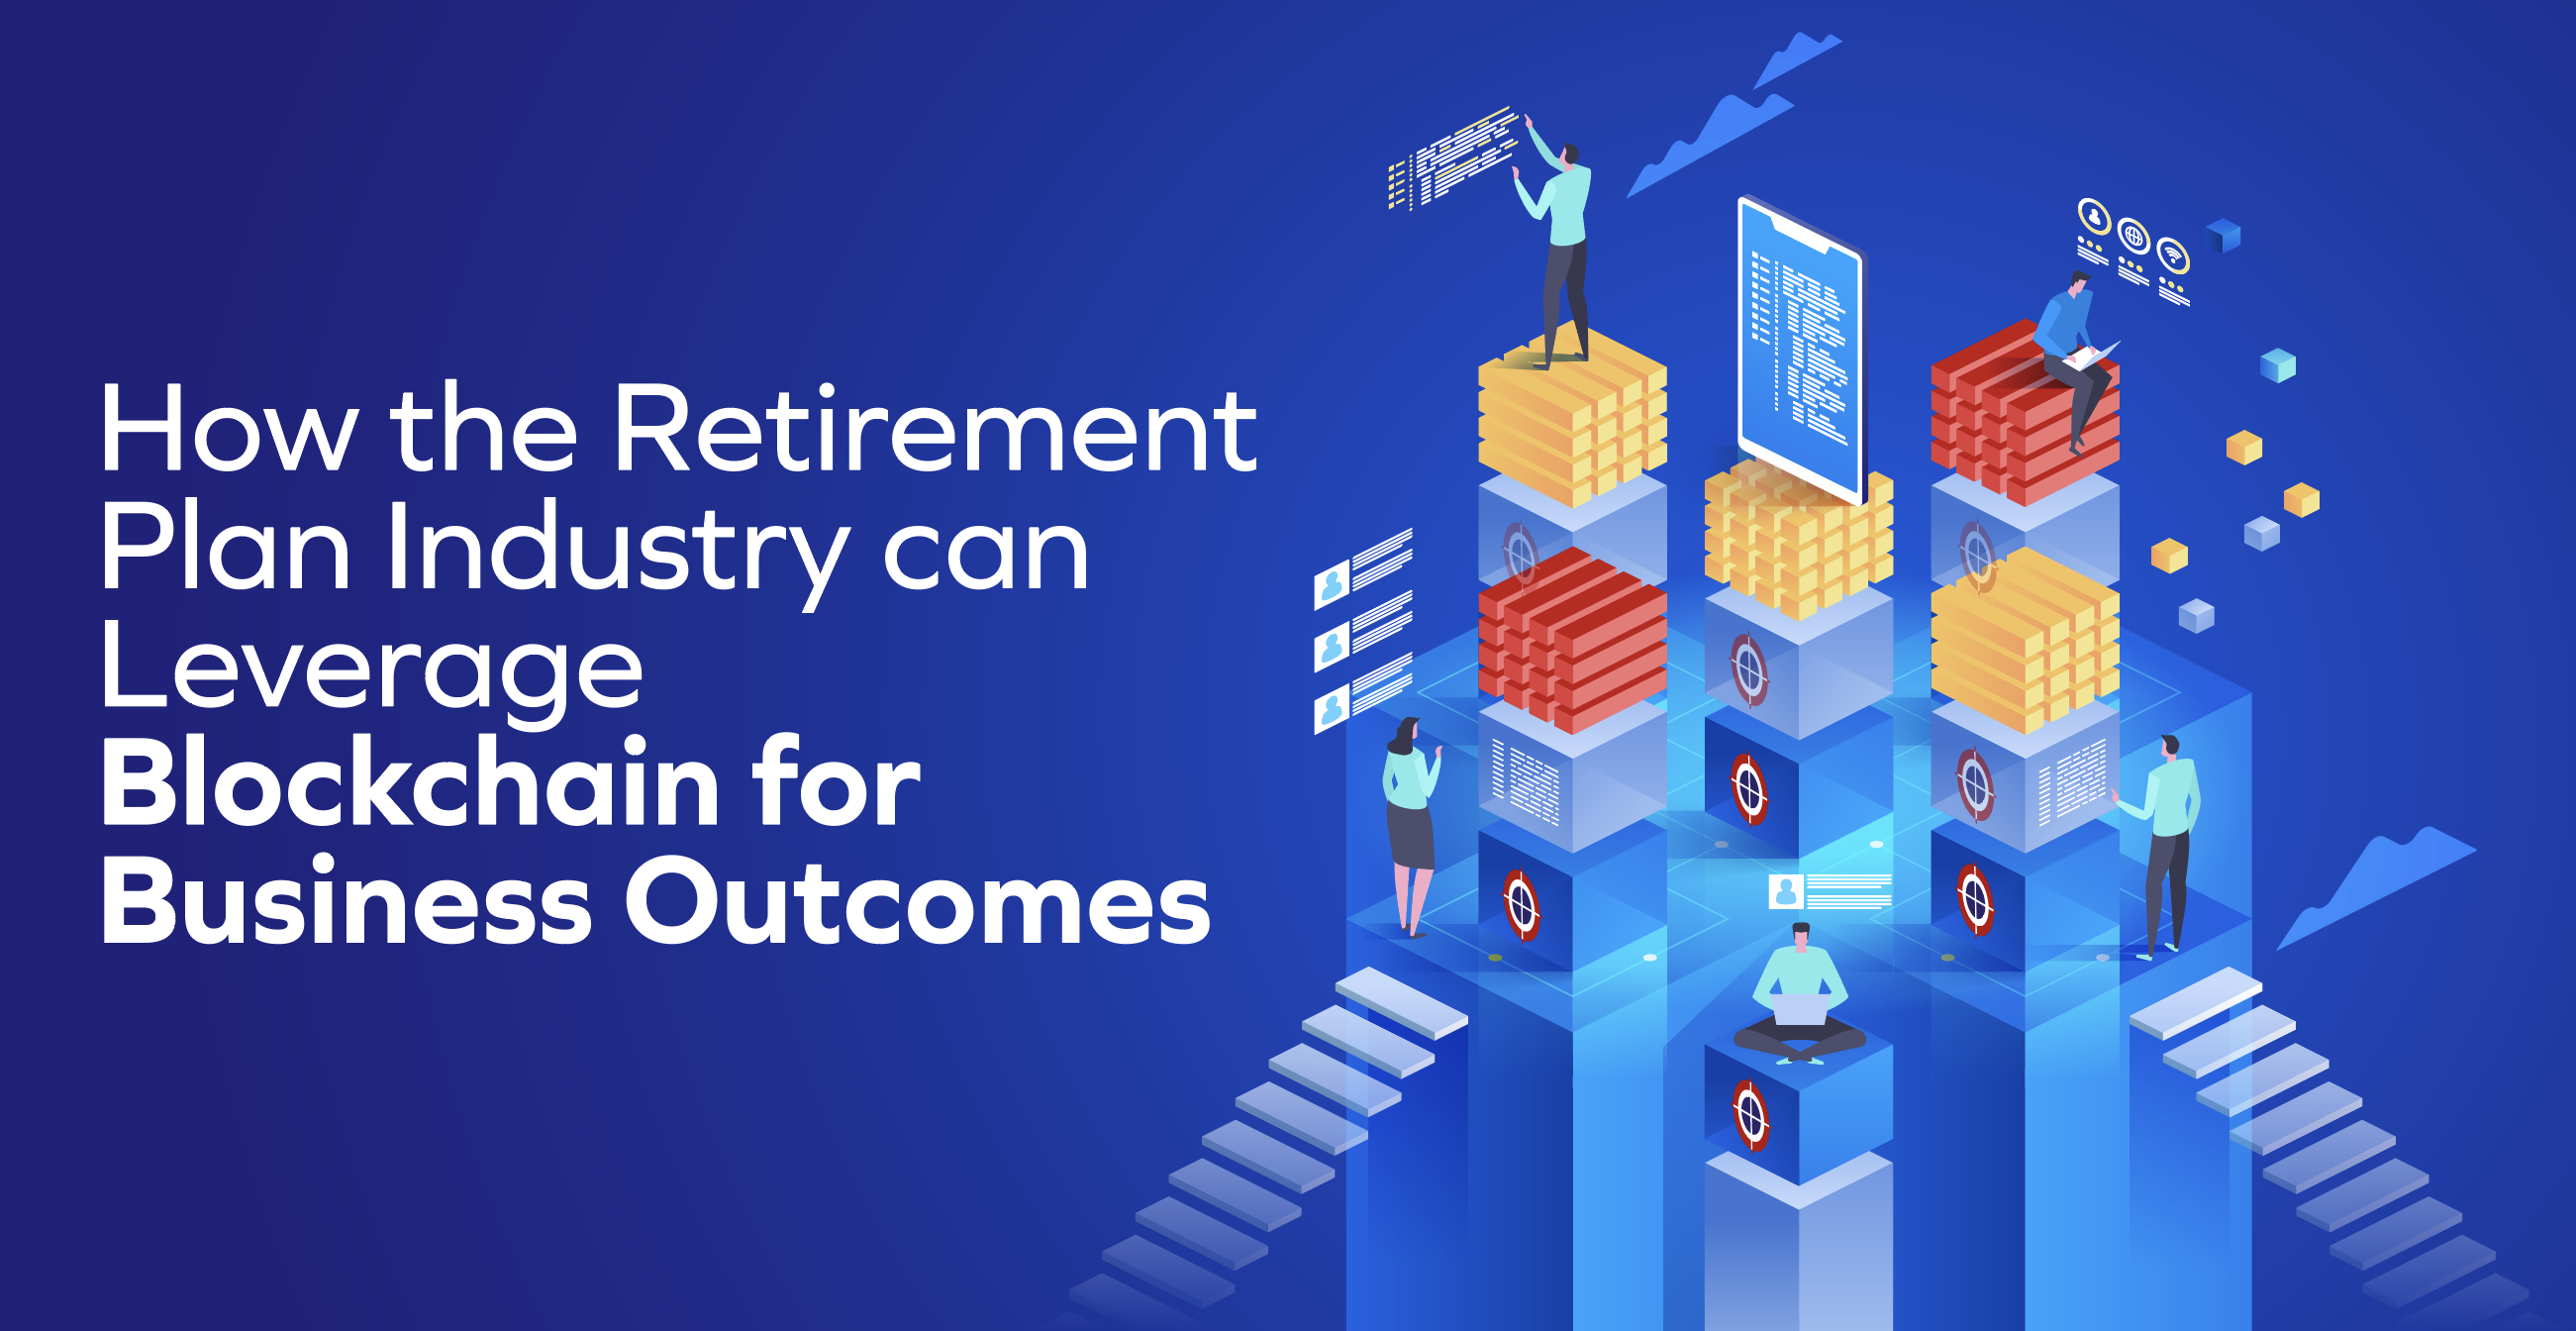 How the Retirement Plan Industry can Leverage Blockchain?